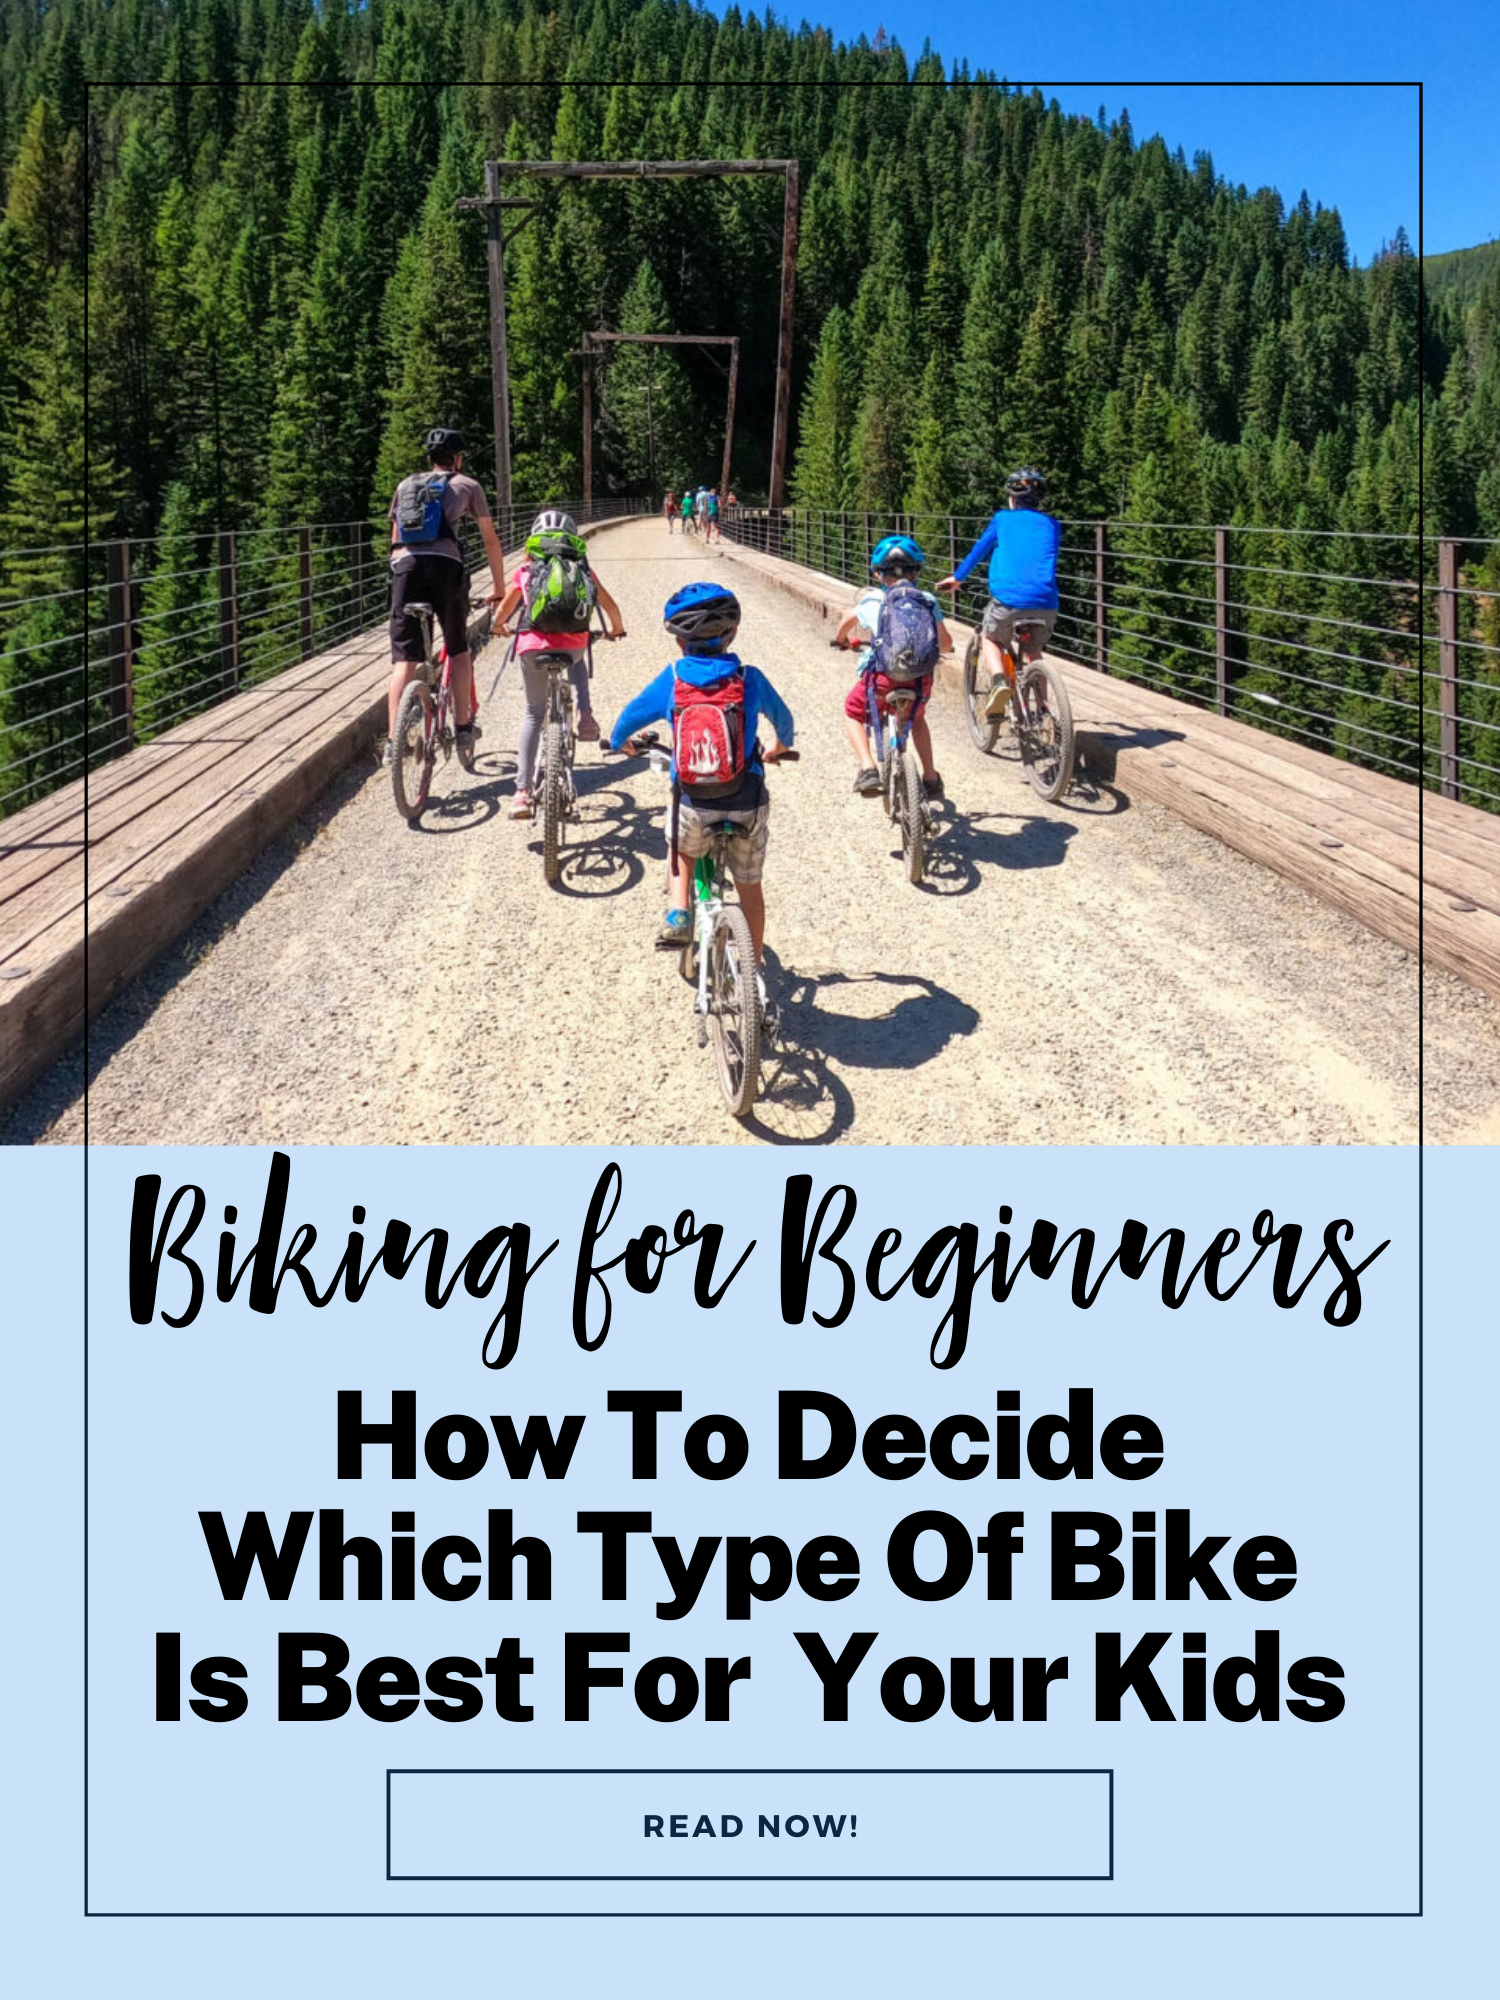 balance bikes vs training wheels: how to decide which type of bike is best for your kids